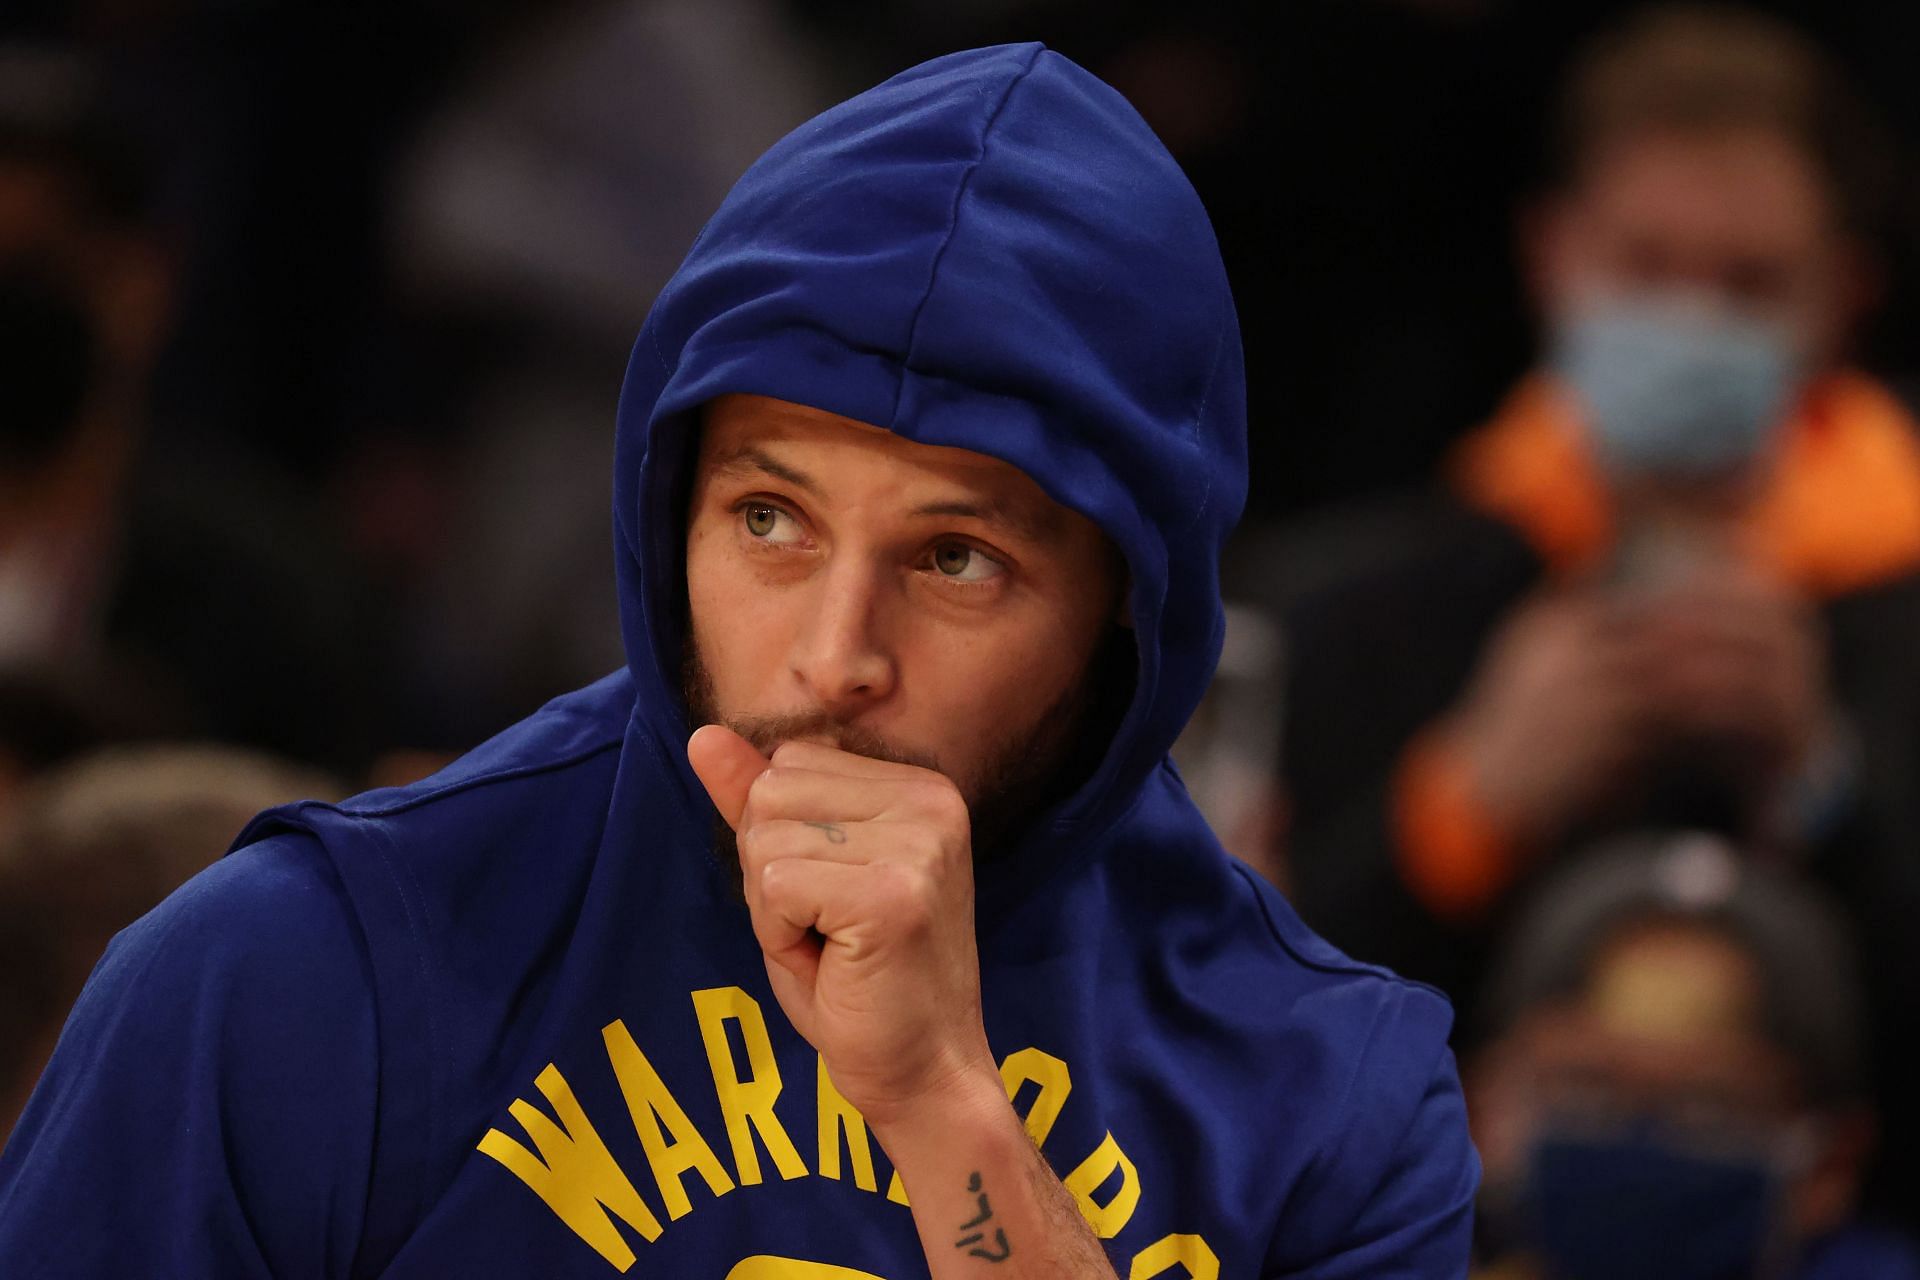 Steph Curry warms up ahead of the Golden State Warriors vs New York Knicks game